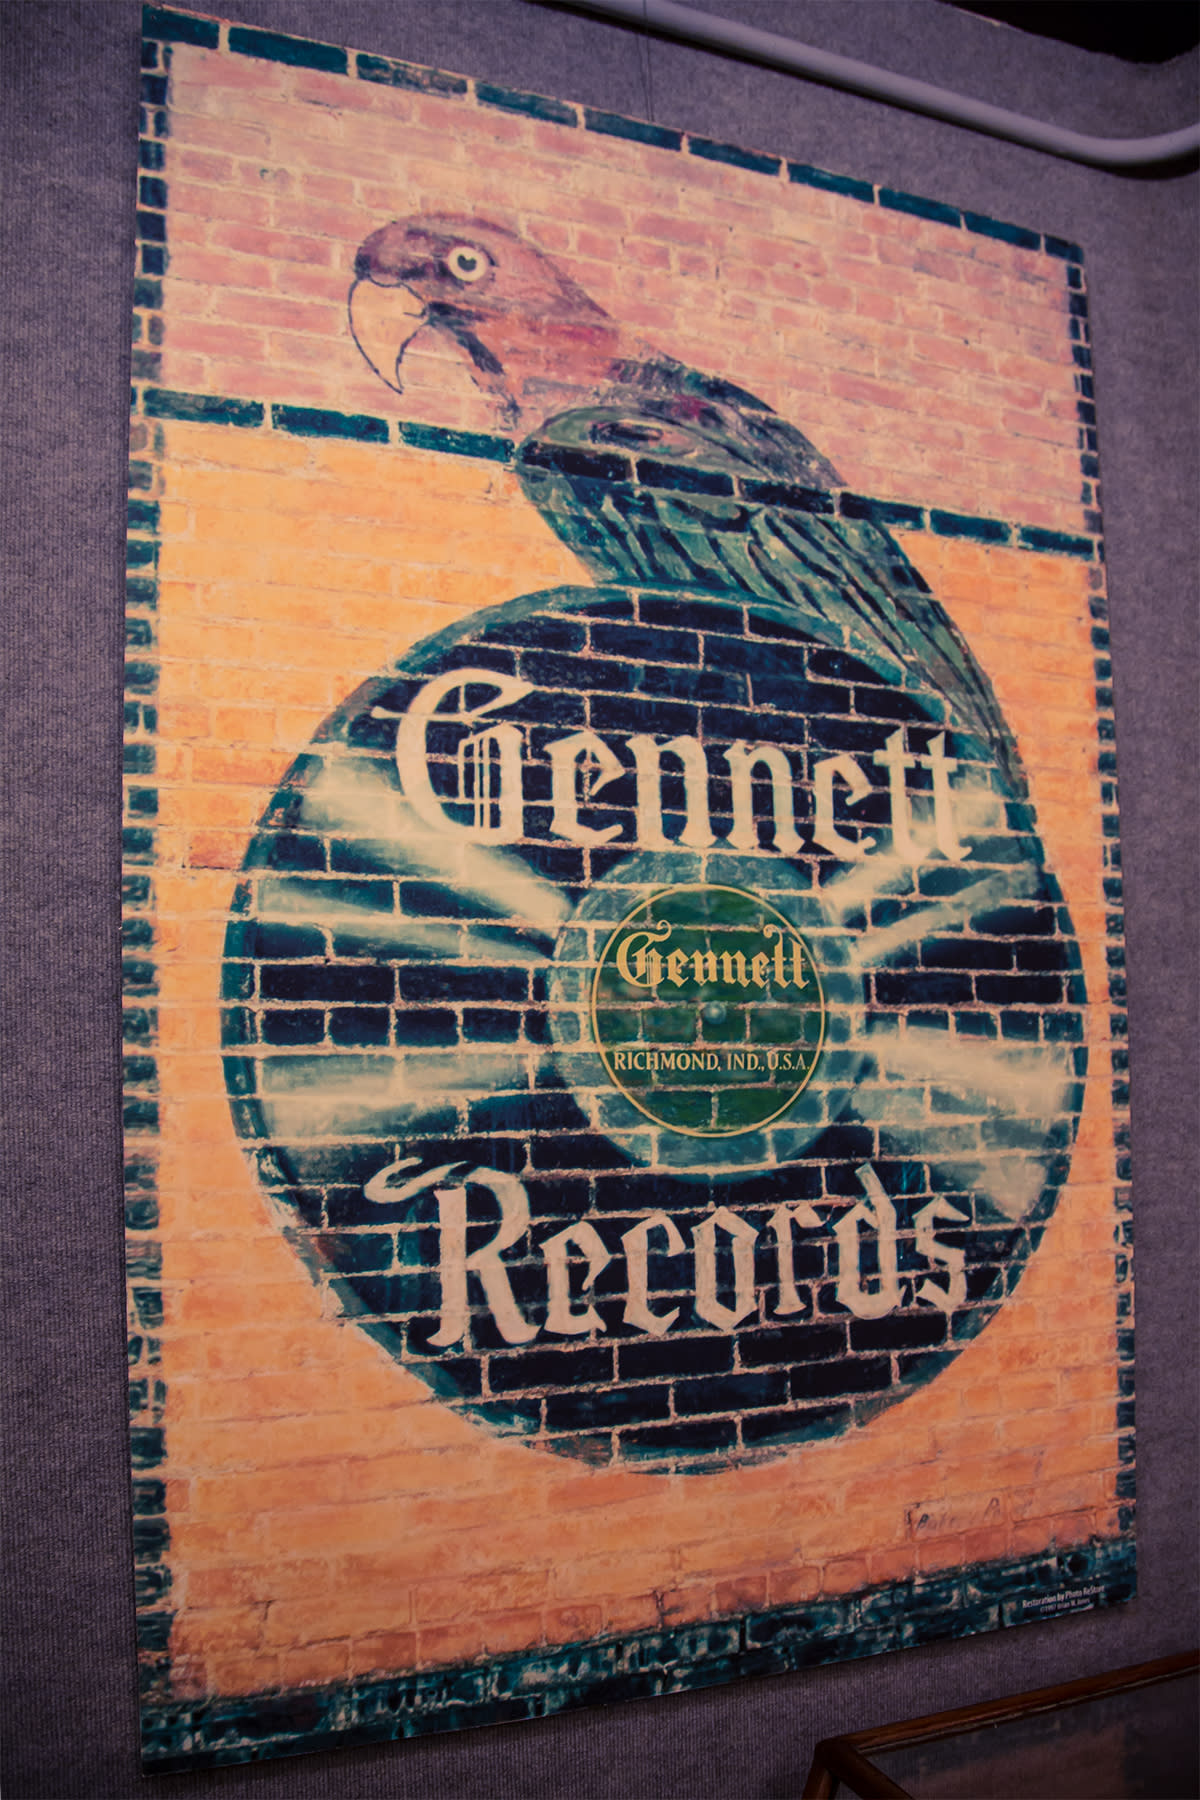 Gennett Records Sign at the Wayne County History Museum